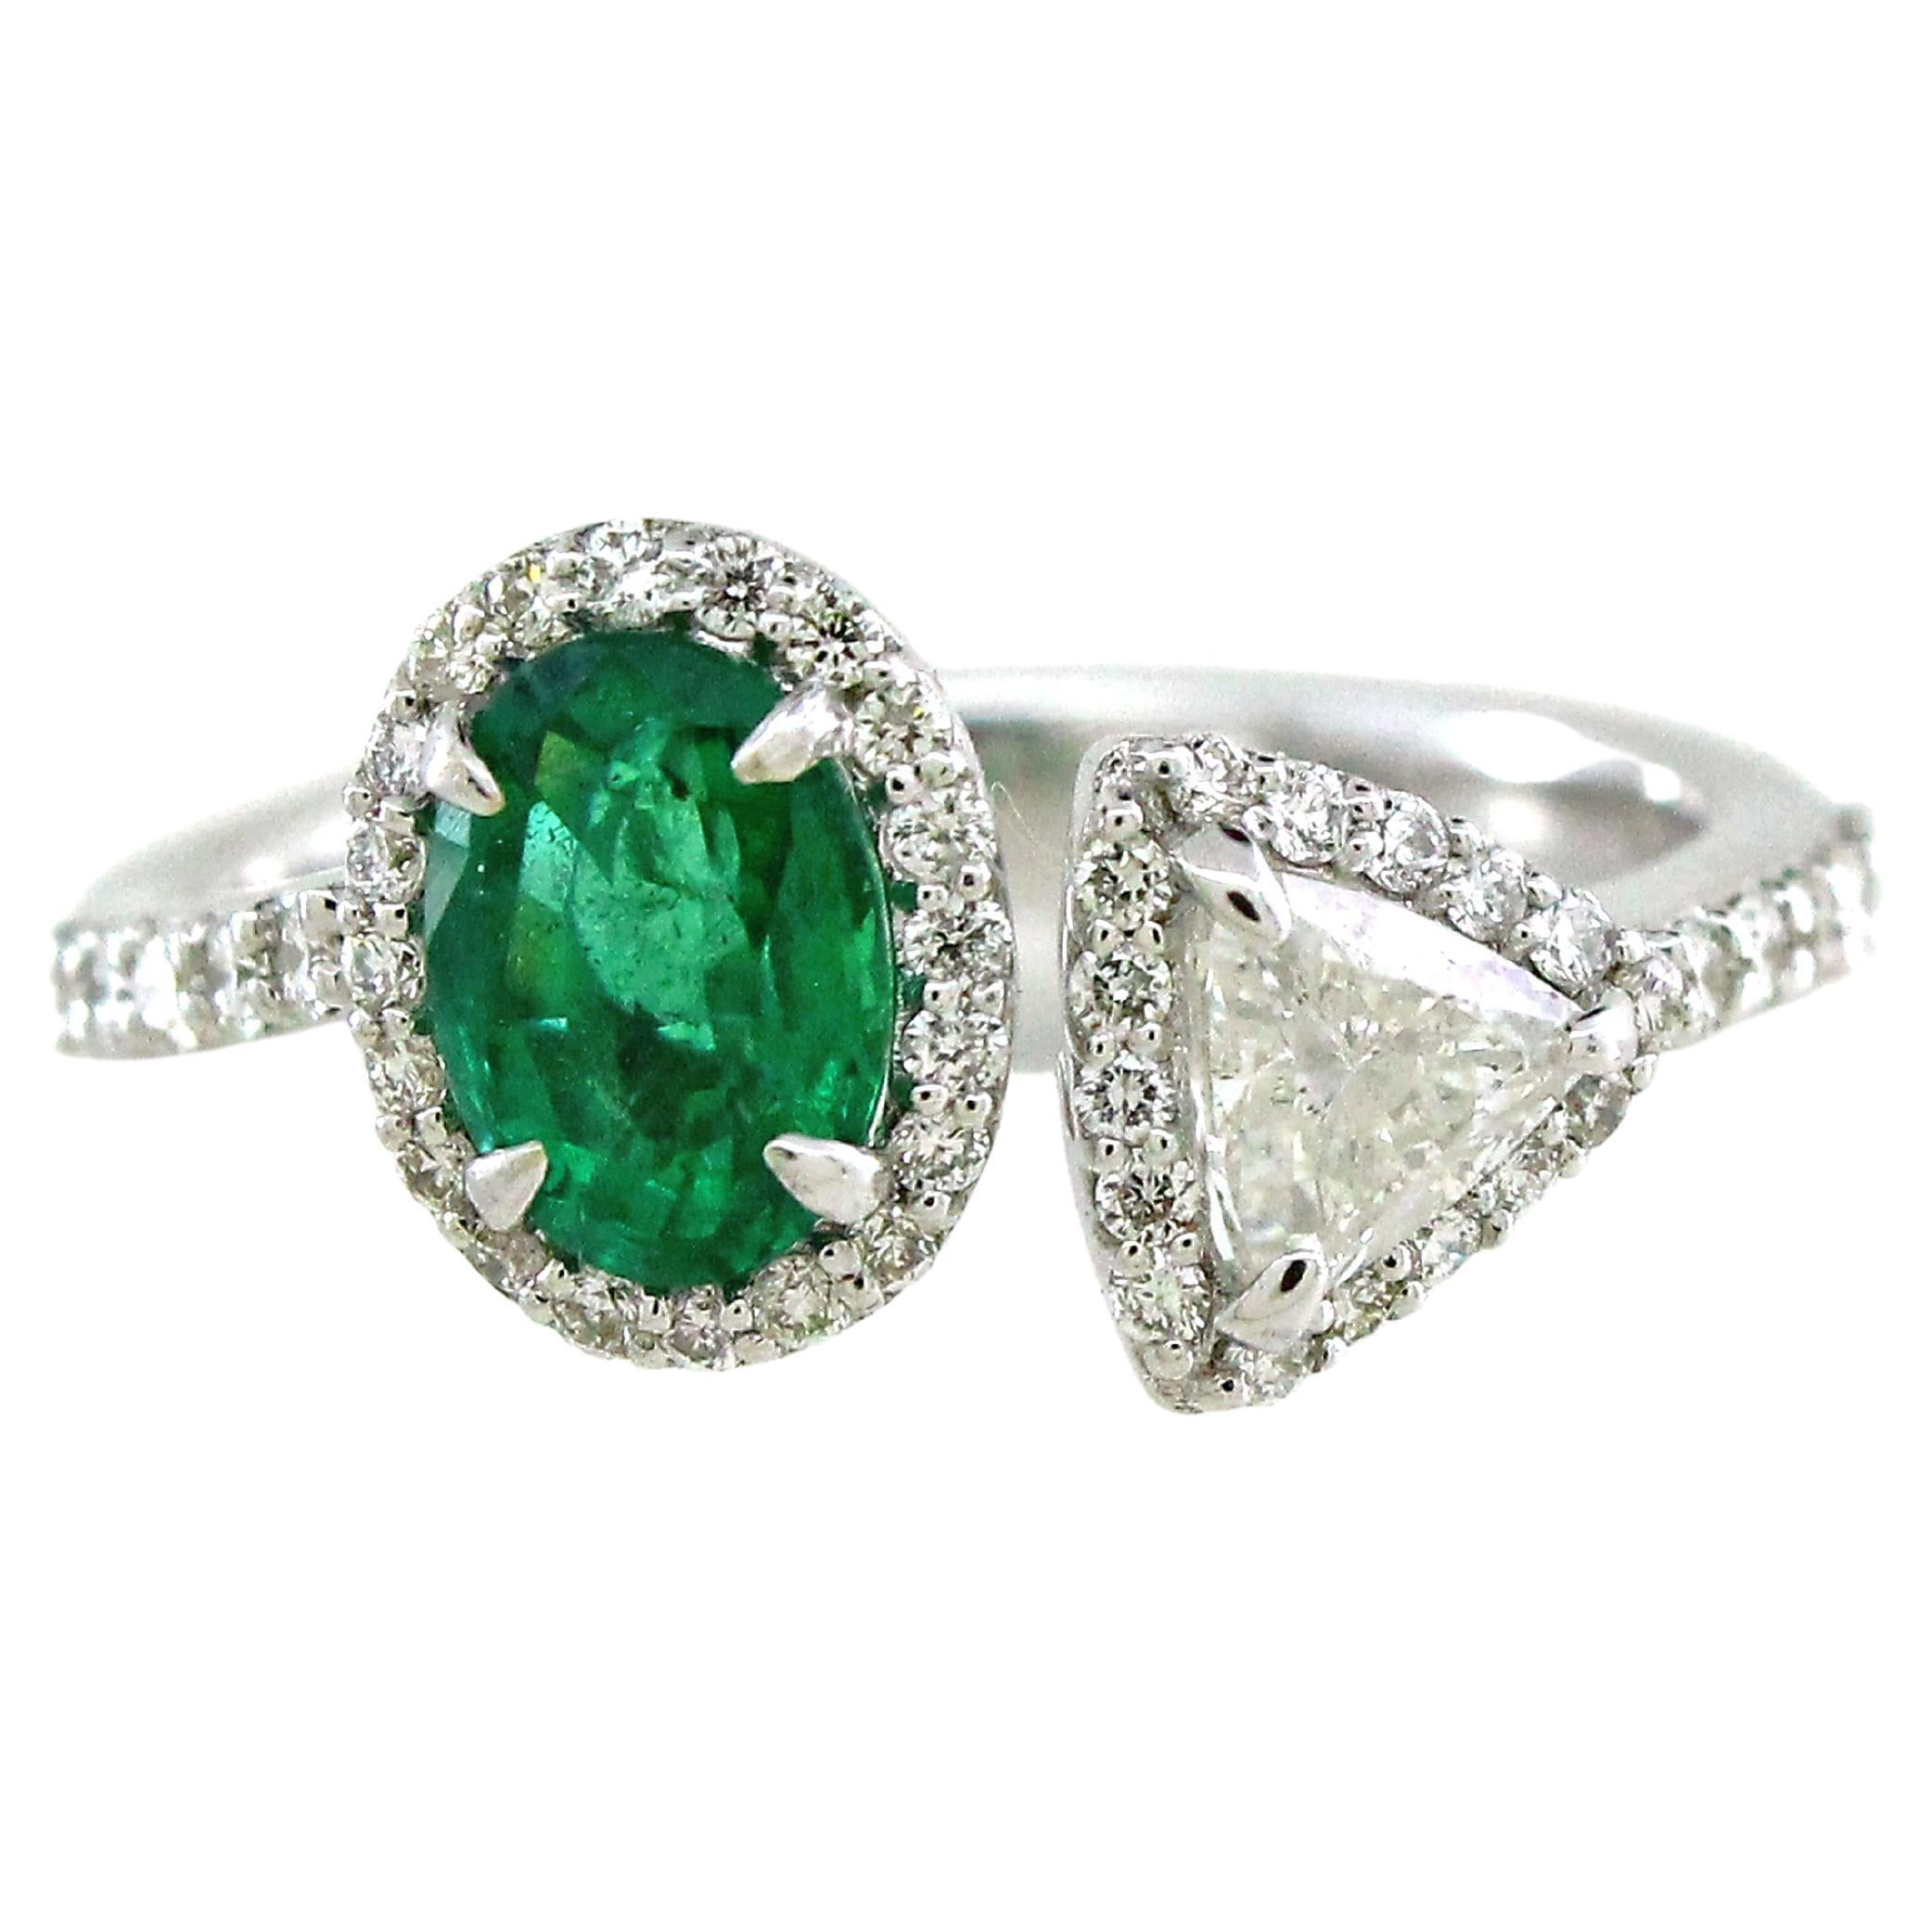 Oval Zambian Emerald 0.72 ct Toi-et-moi Ring For Sale